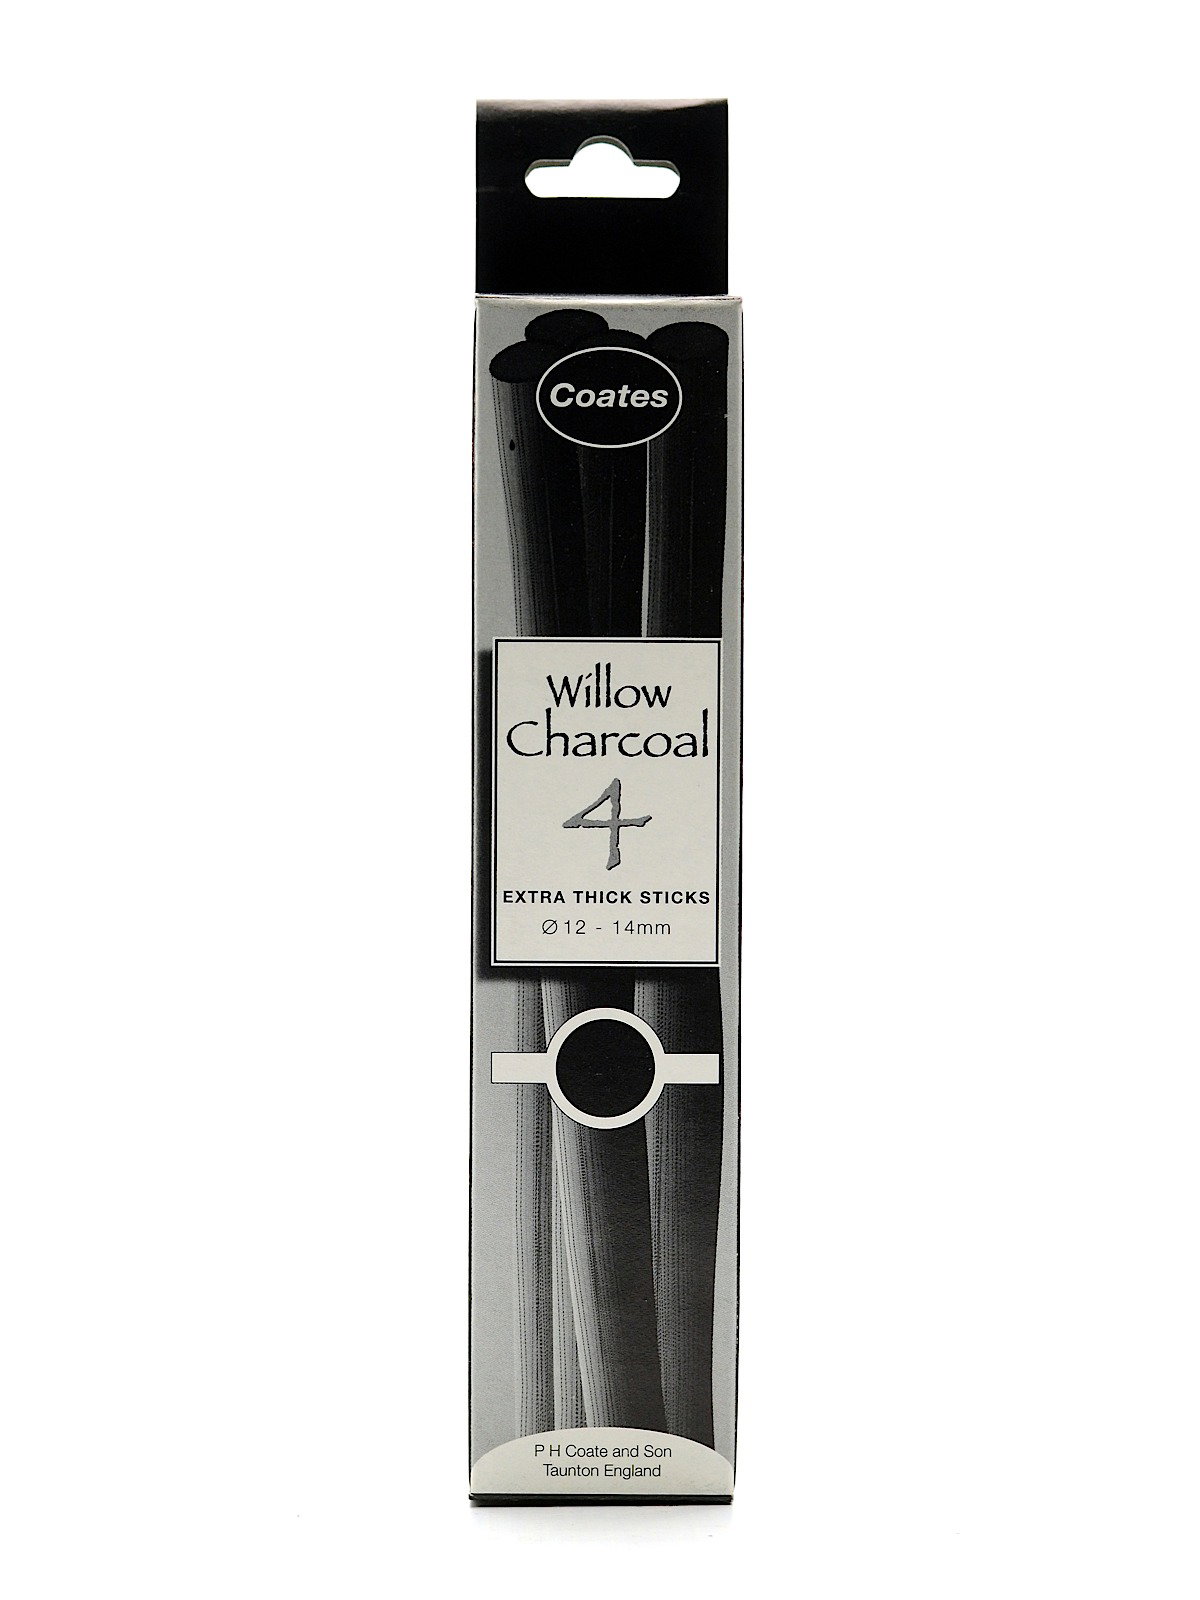 Coates Willow Charcoal 5 Stick Thin (Box of 25)